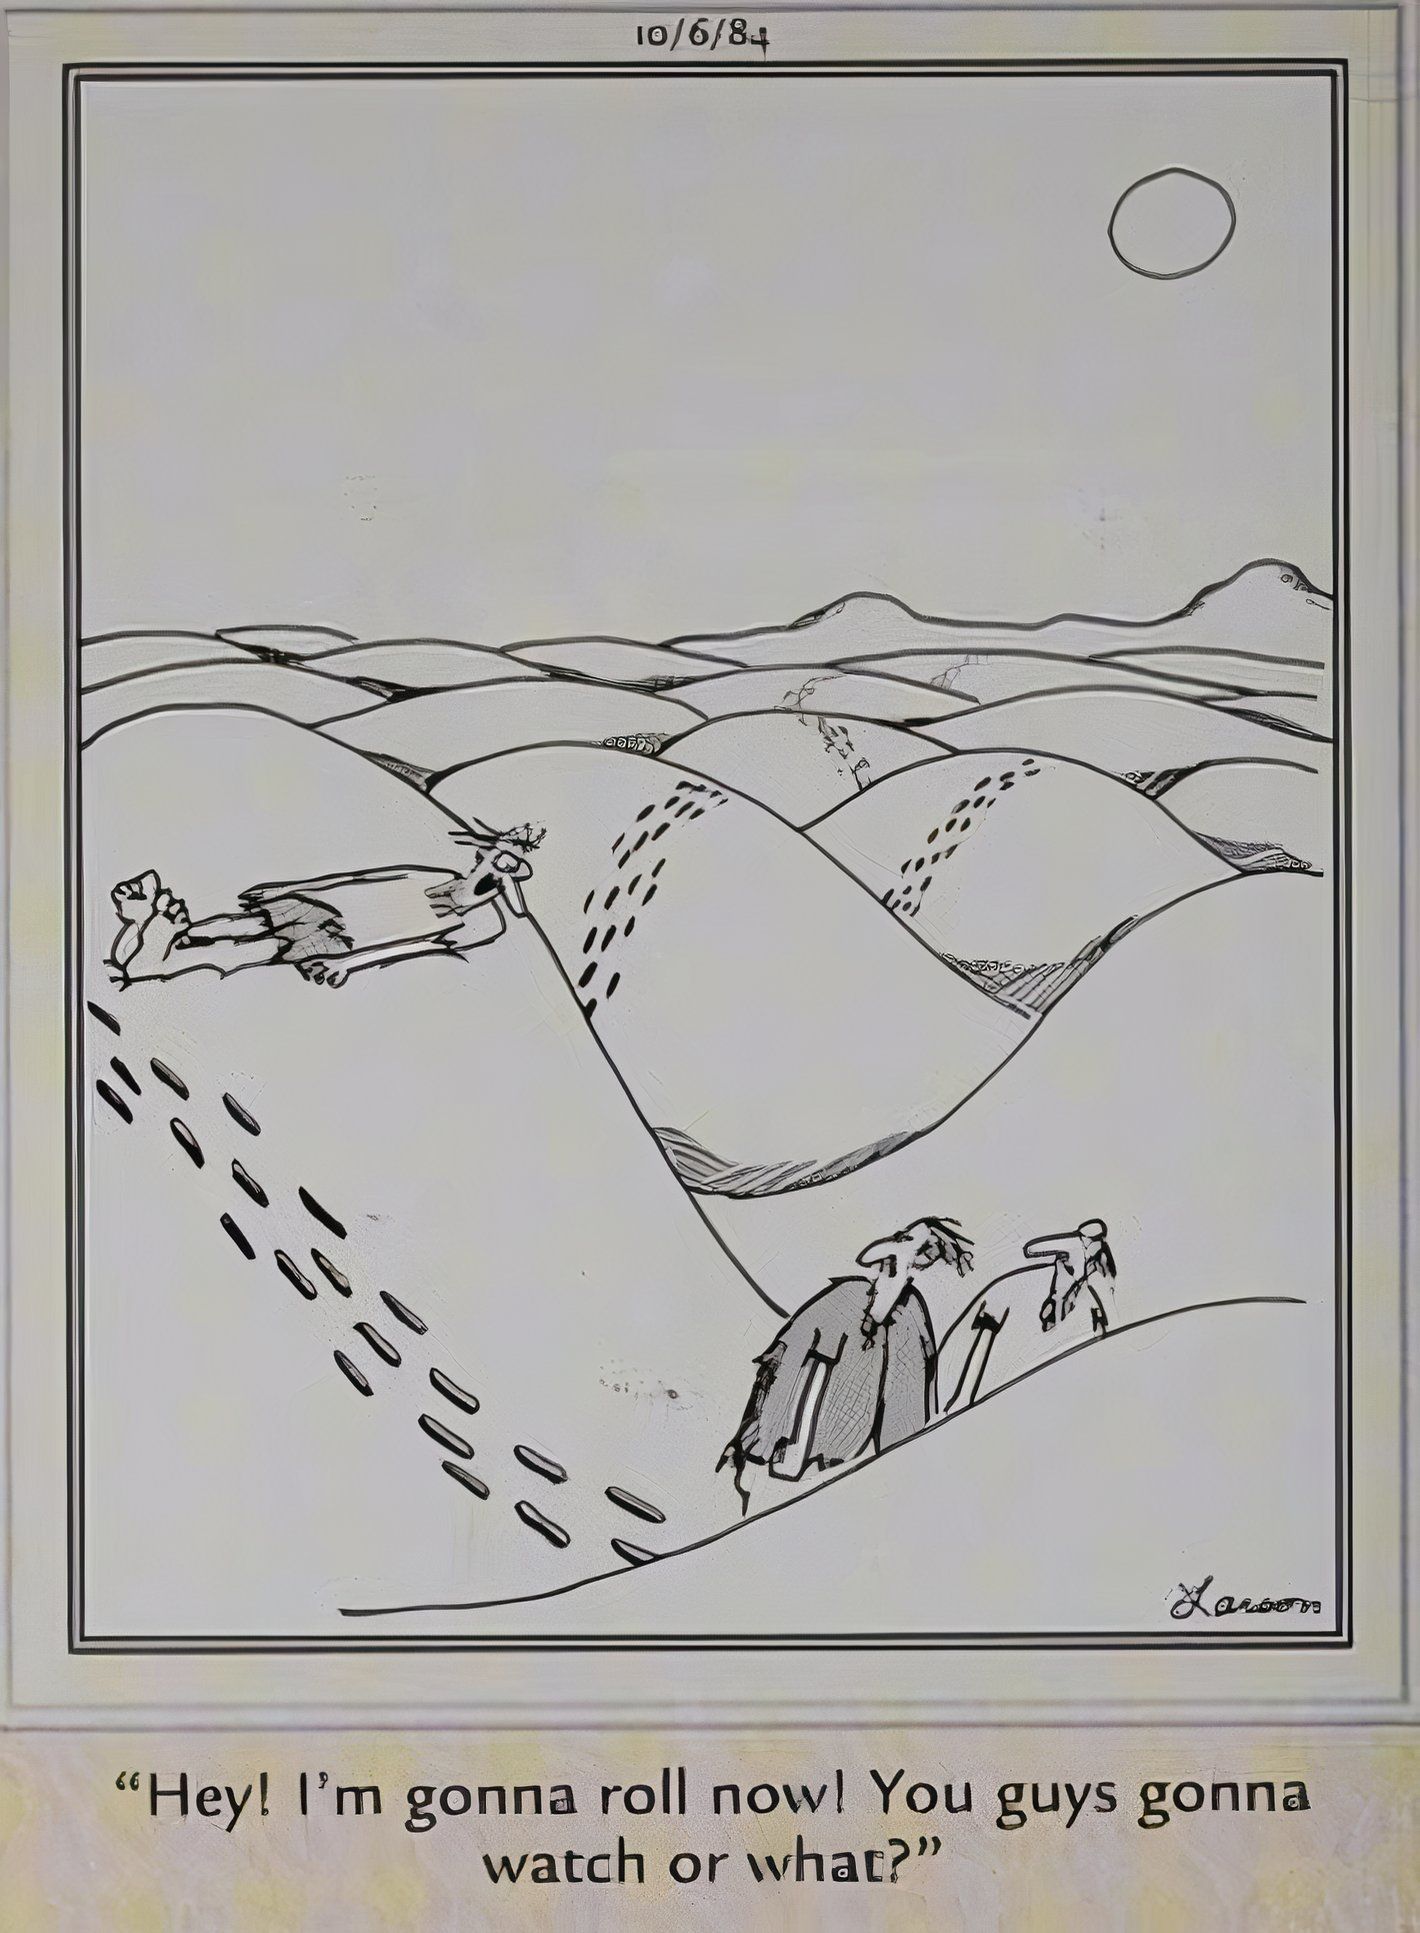 Far Side, man about to roll down a sand dune as his friends look on